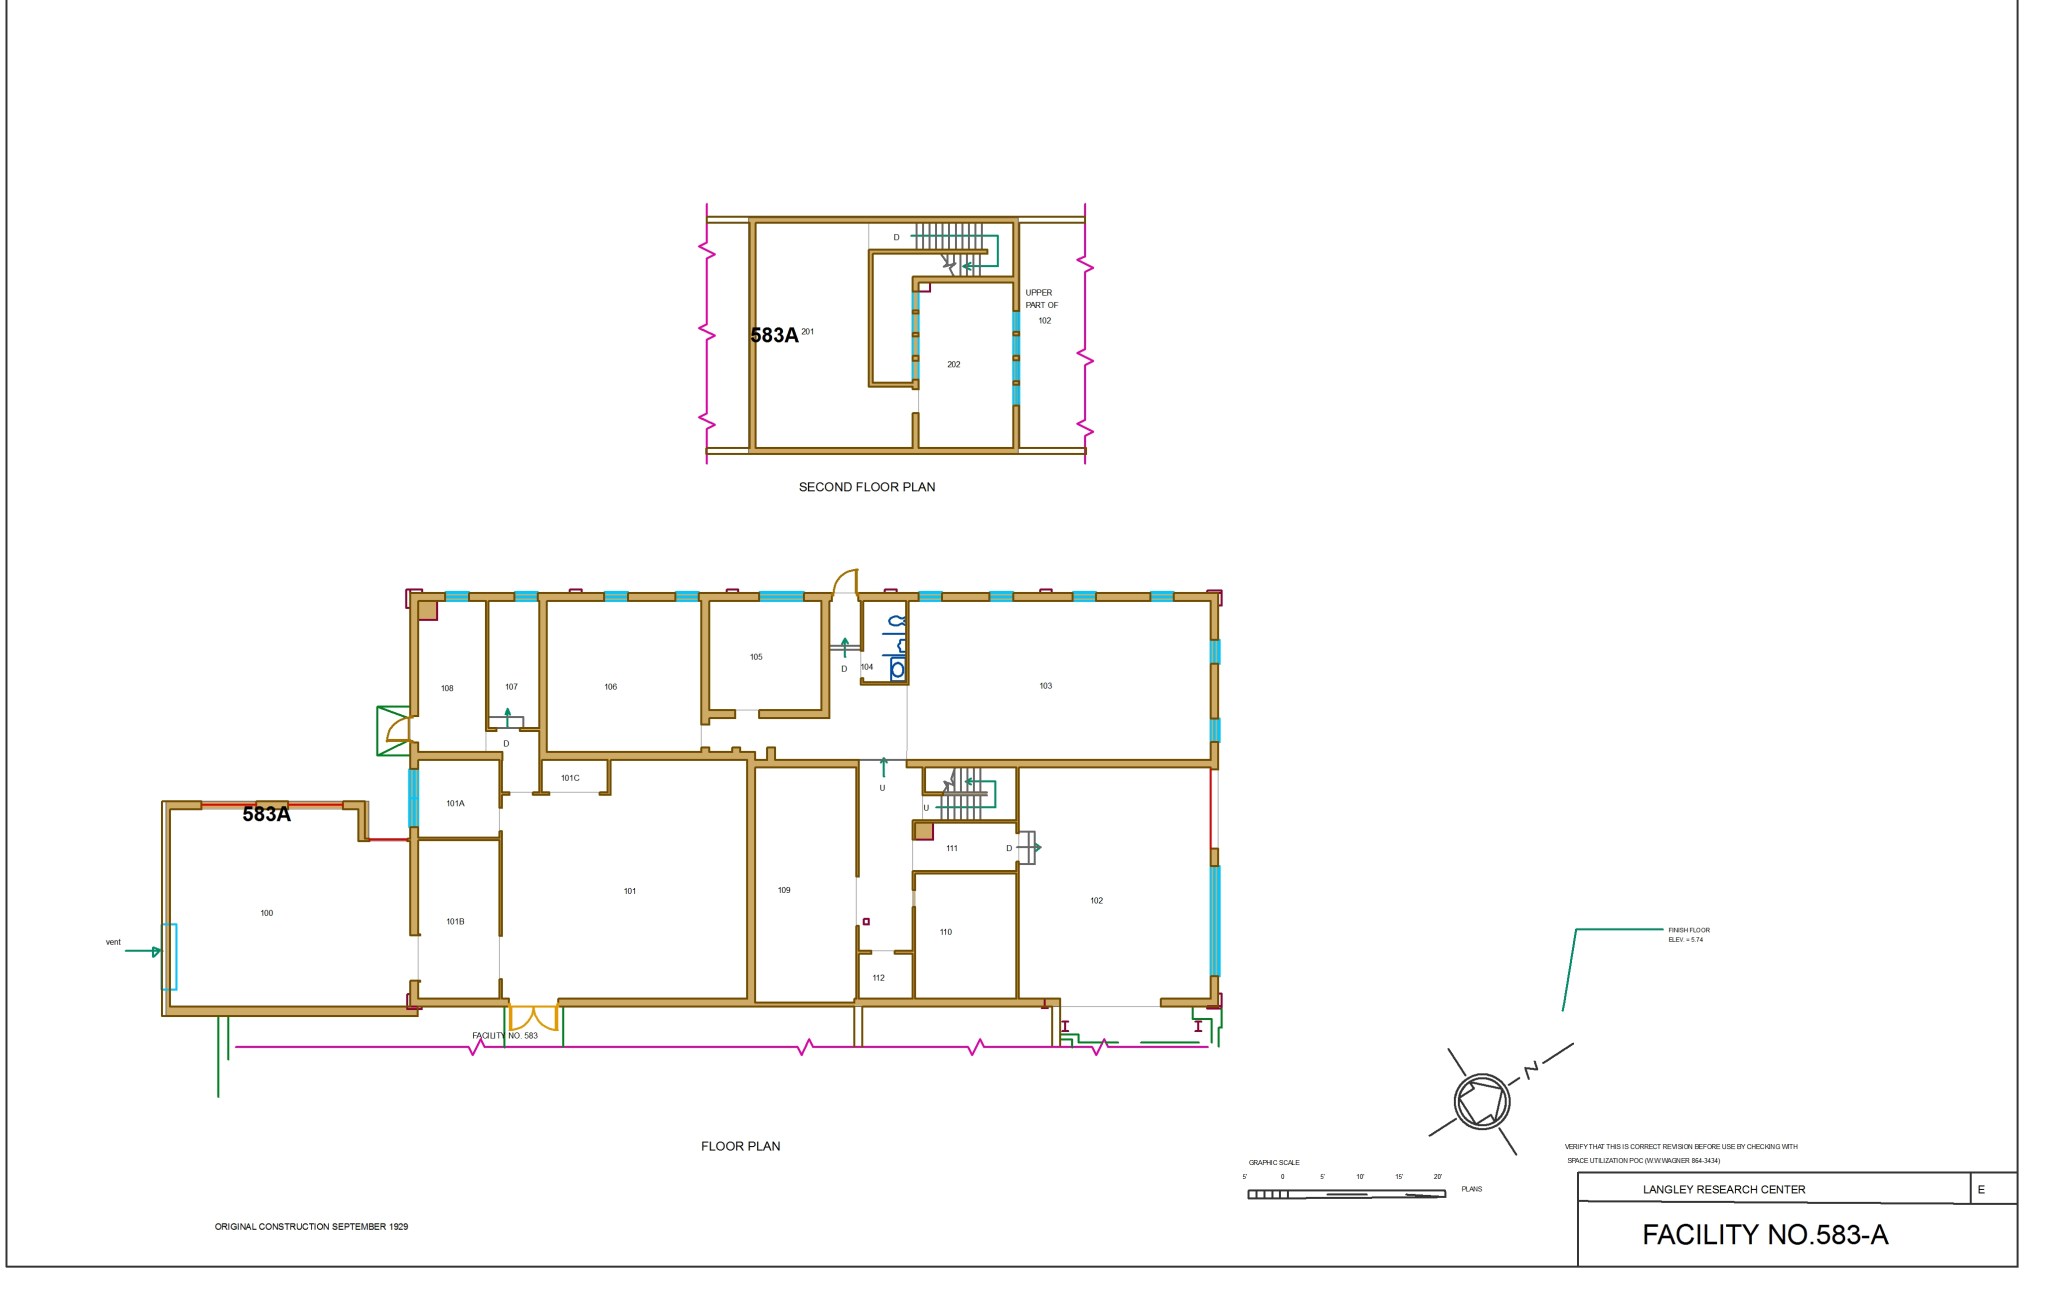 This is a drawing of the floor plan of Building 583A in 2012.